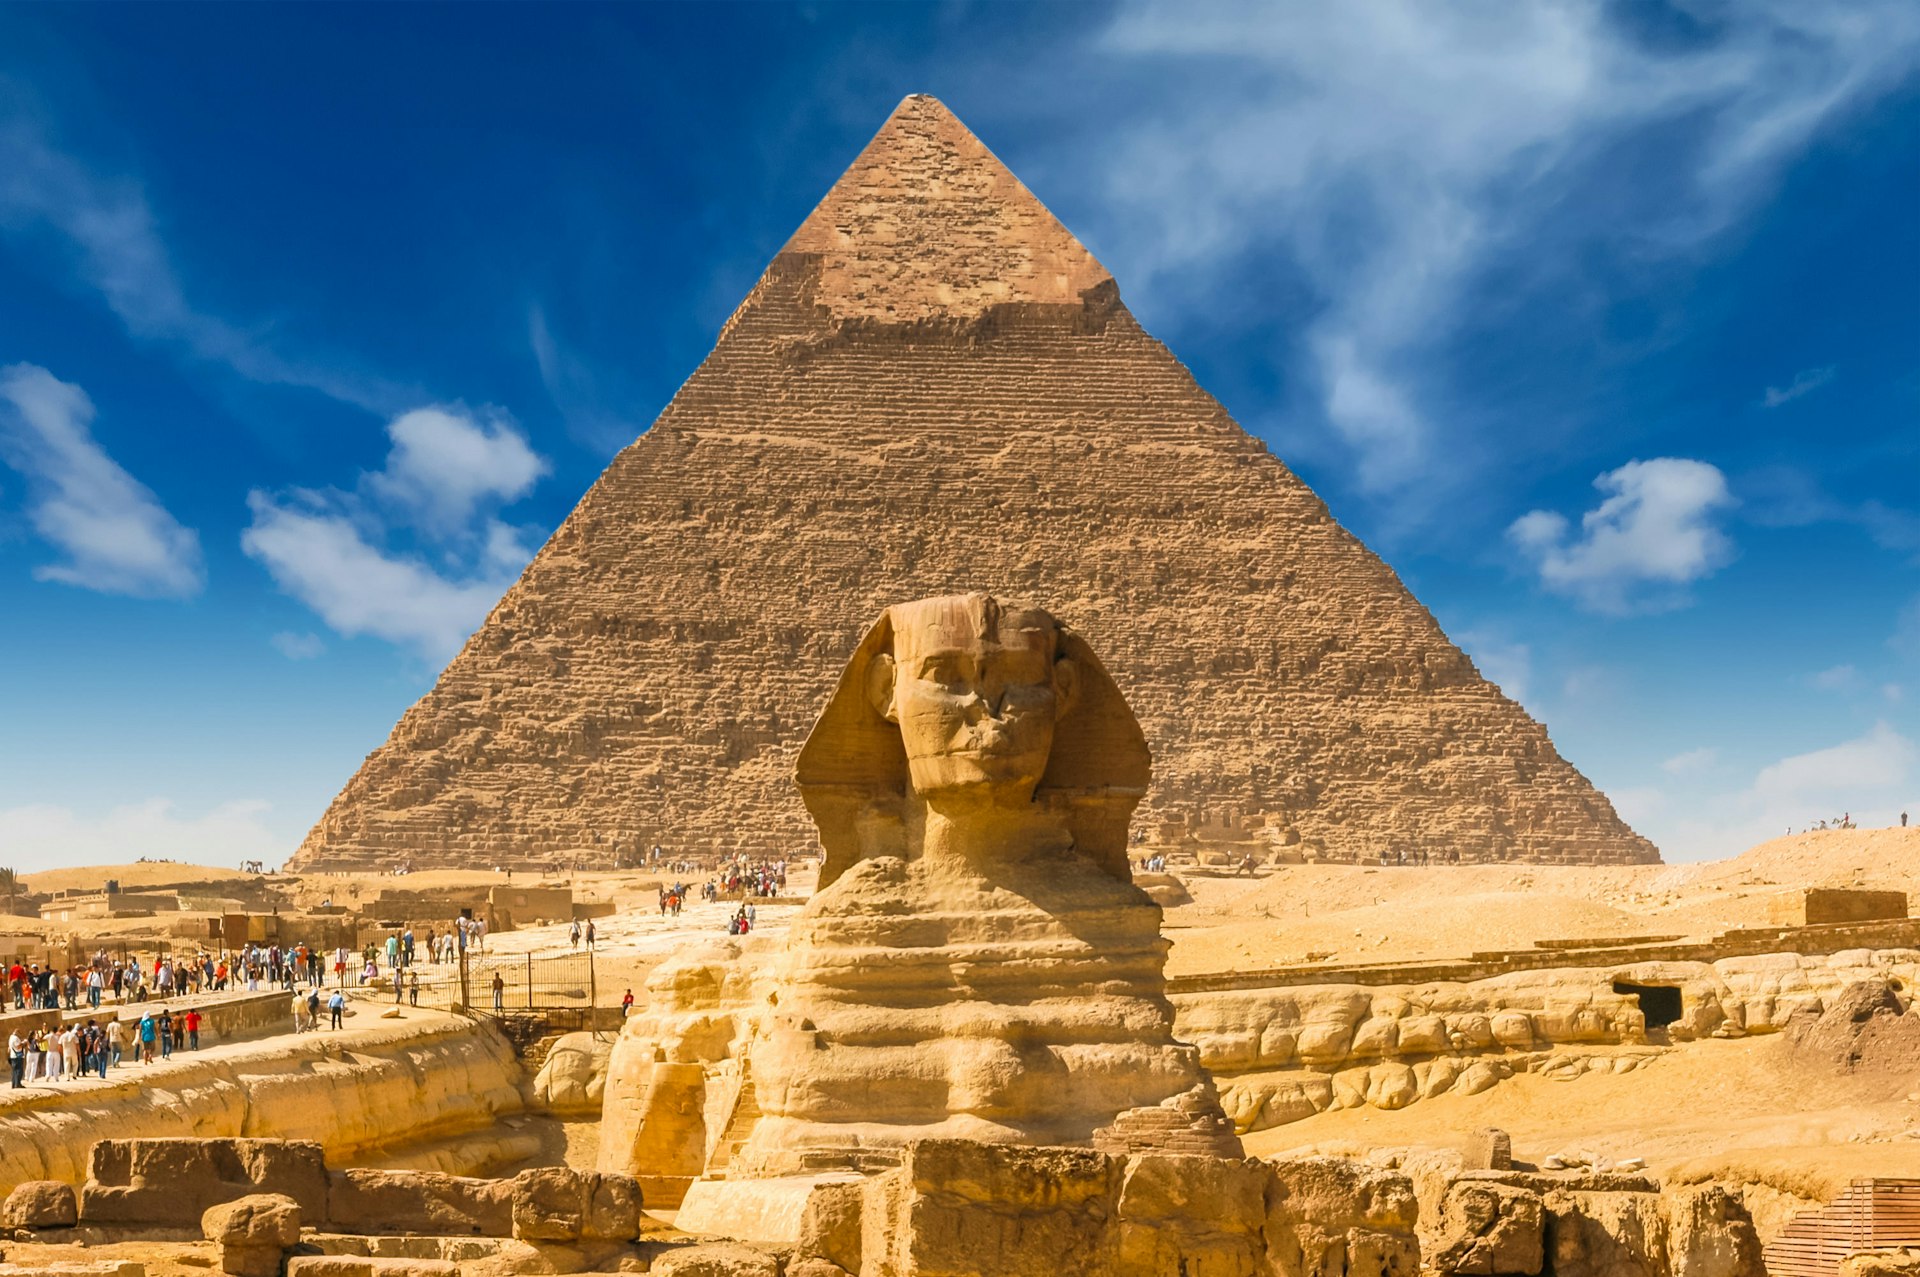 Great Sphinx of Giza with the Great Pyramid of Giza.